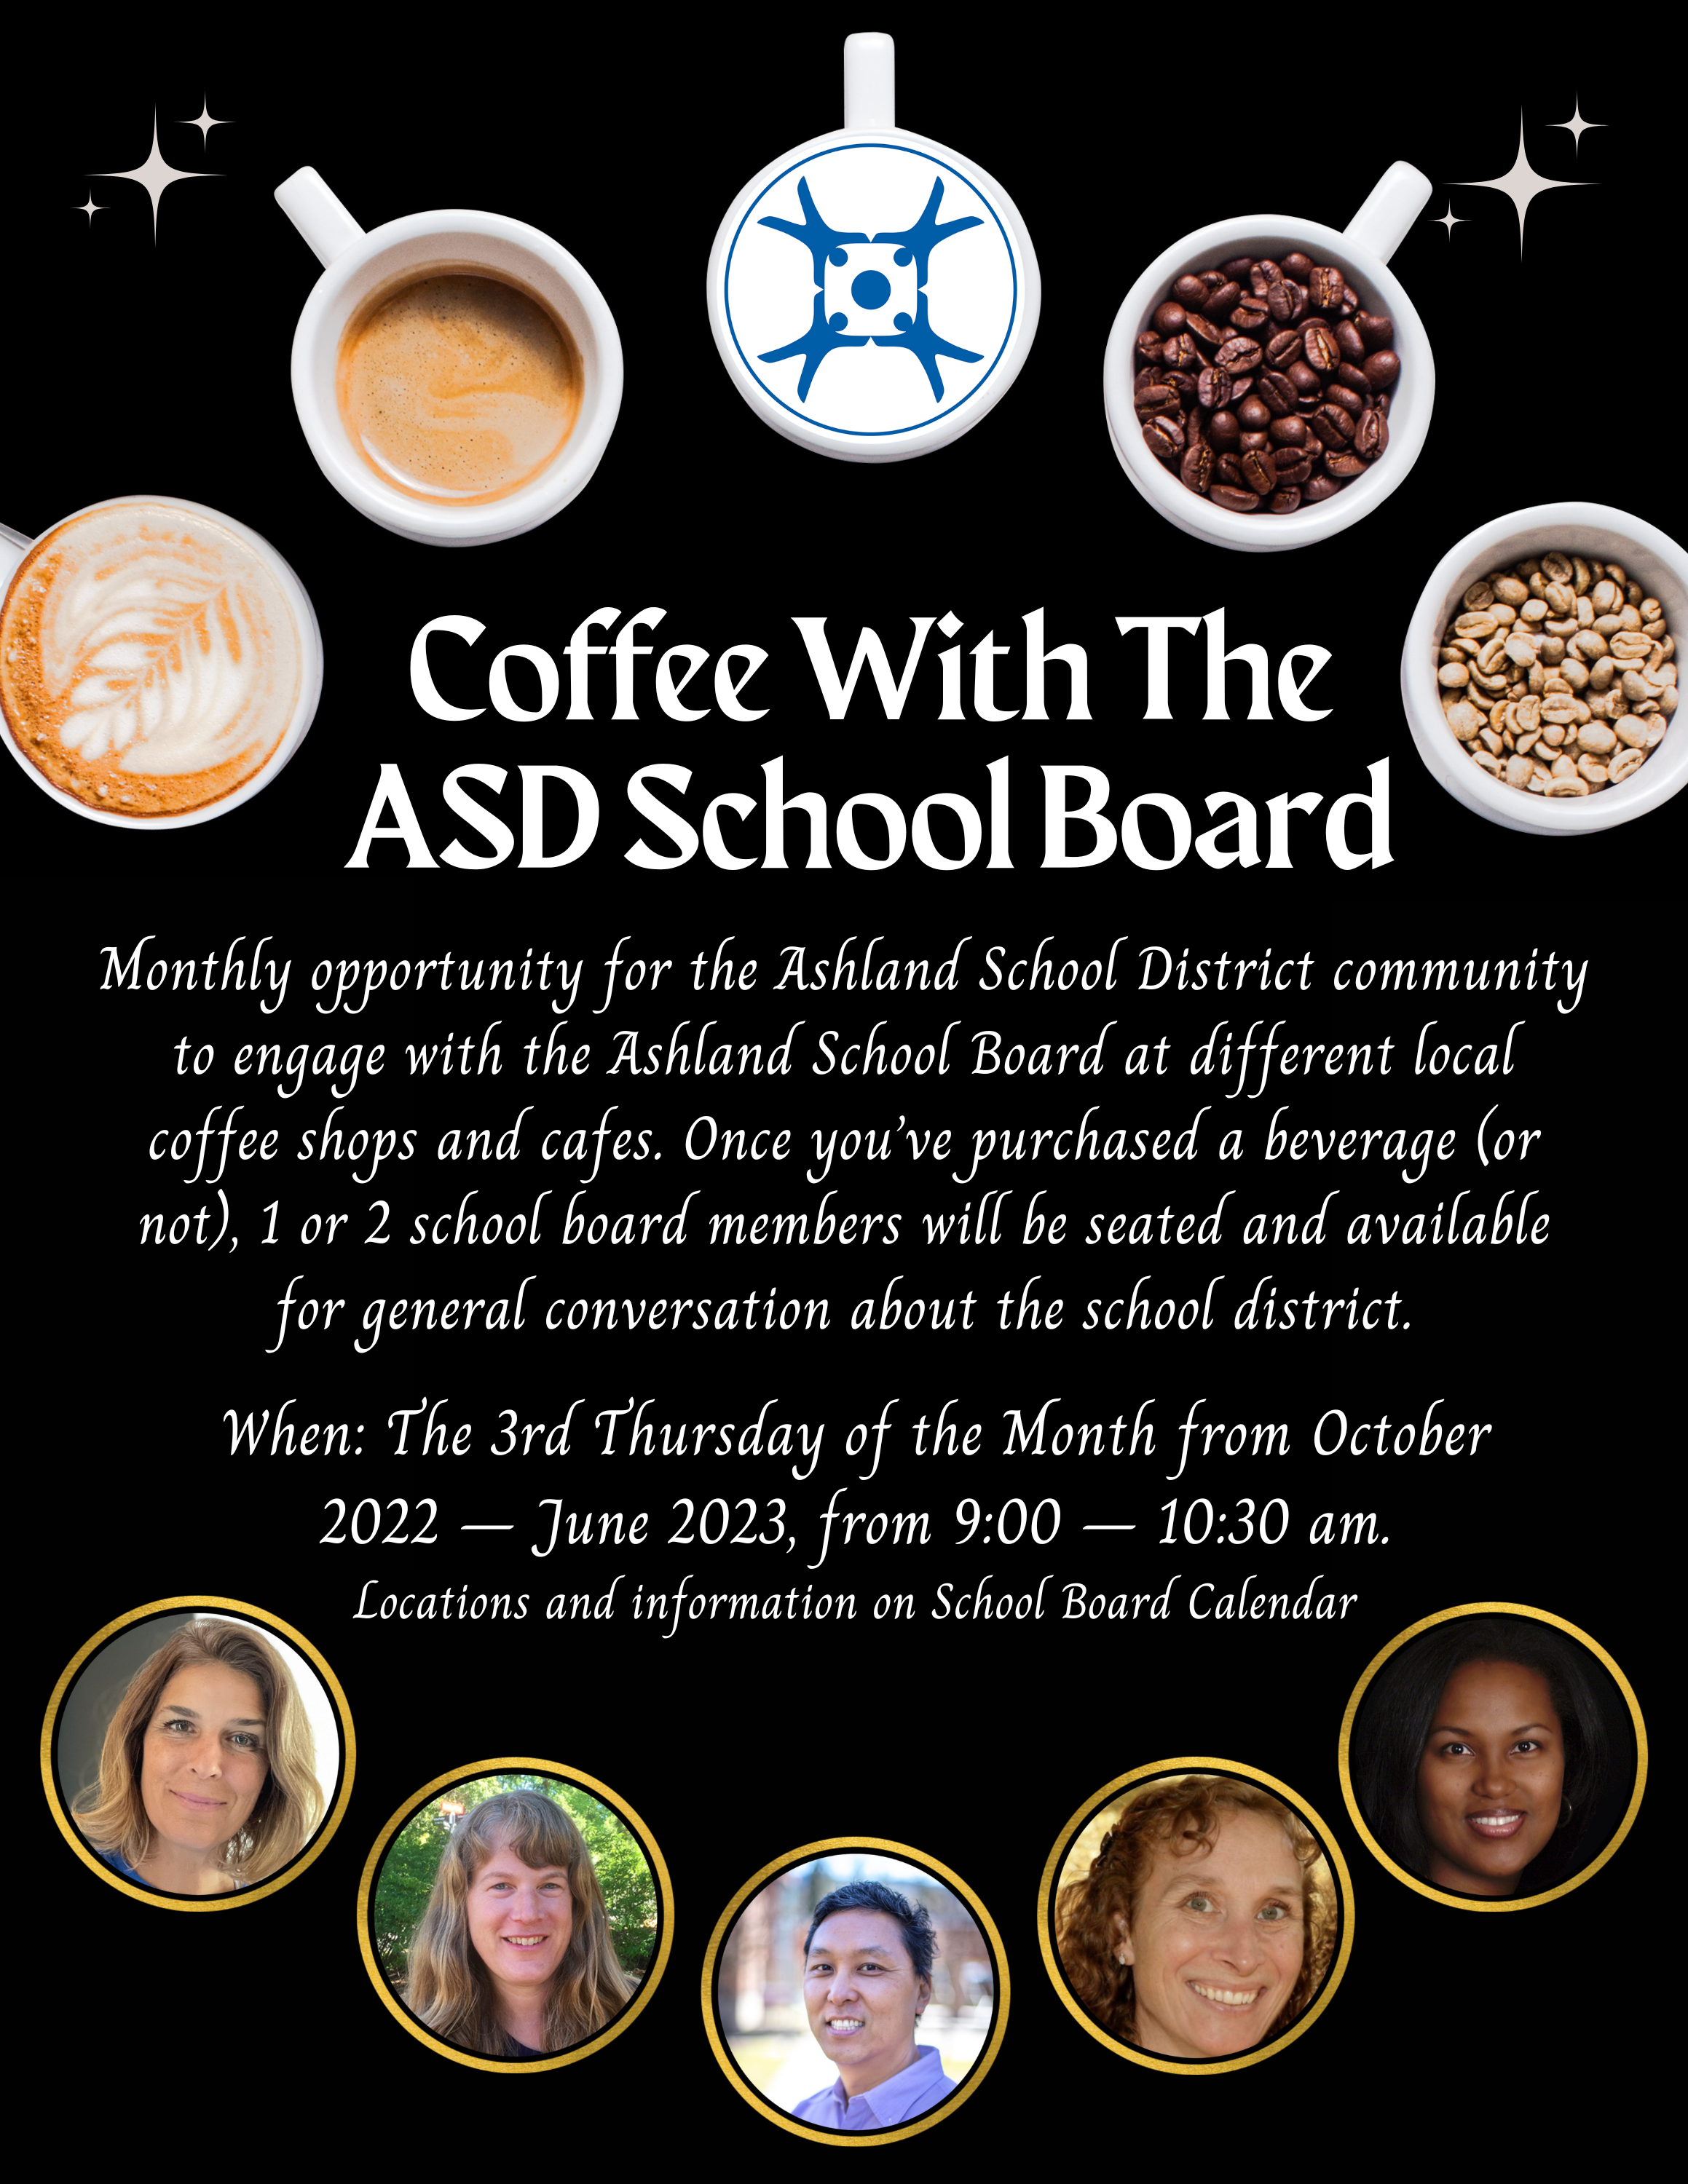 Monthly opportunity for the Ashland School District community to engage with the Ashland School Board at different local coffee shops and cafes. Once you’ve purchased a beverage (or not), 1 or 2 school board members will be seated and available for general conversation about the school district.